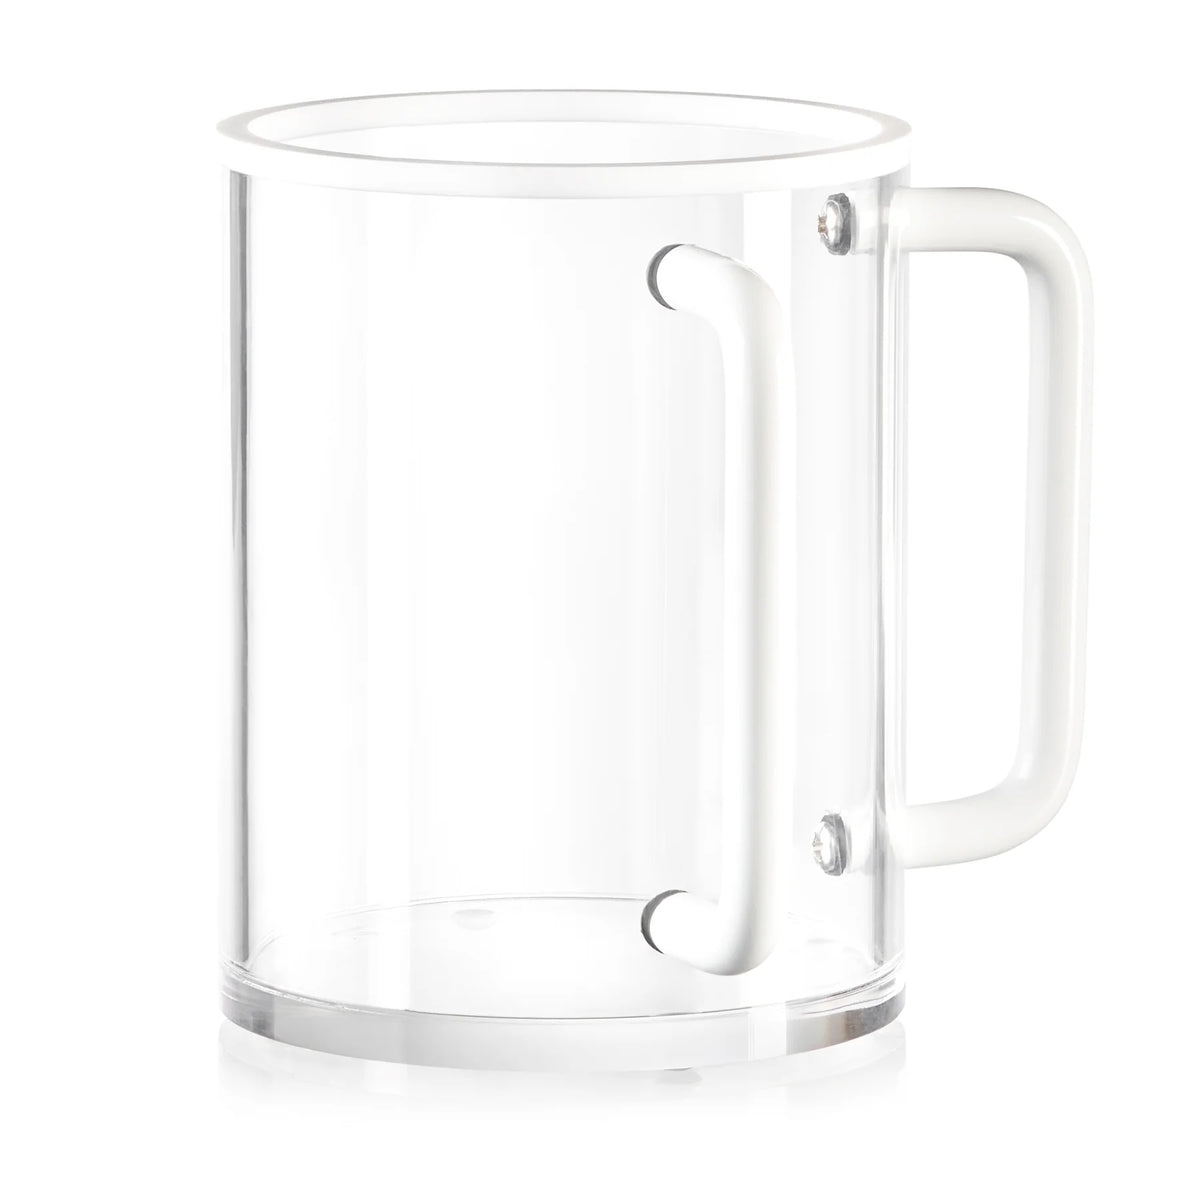 Waterdale Lucite Washing Cup, White Edge